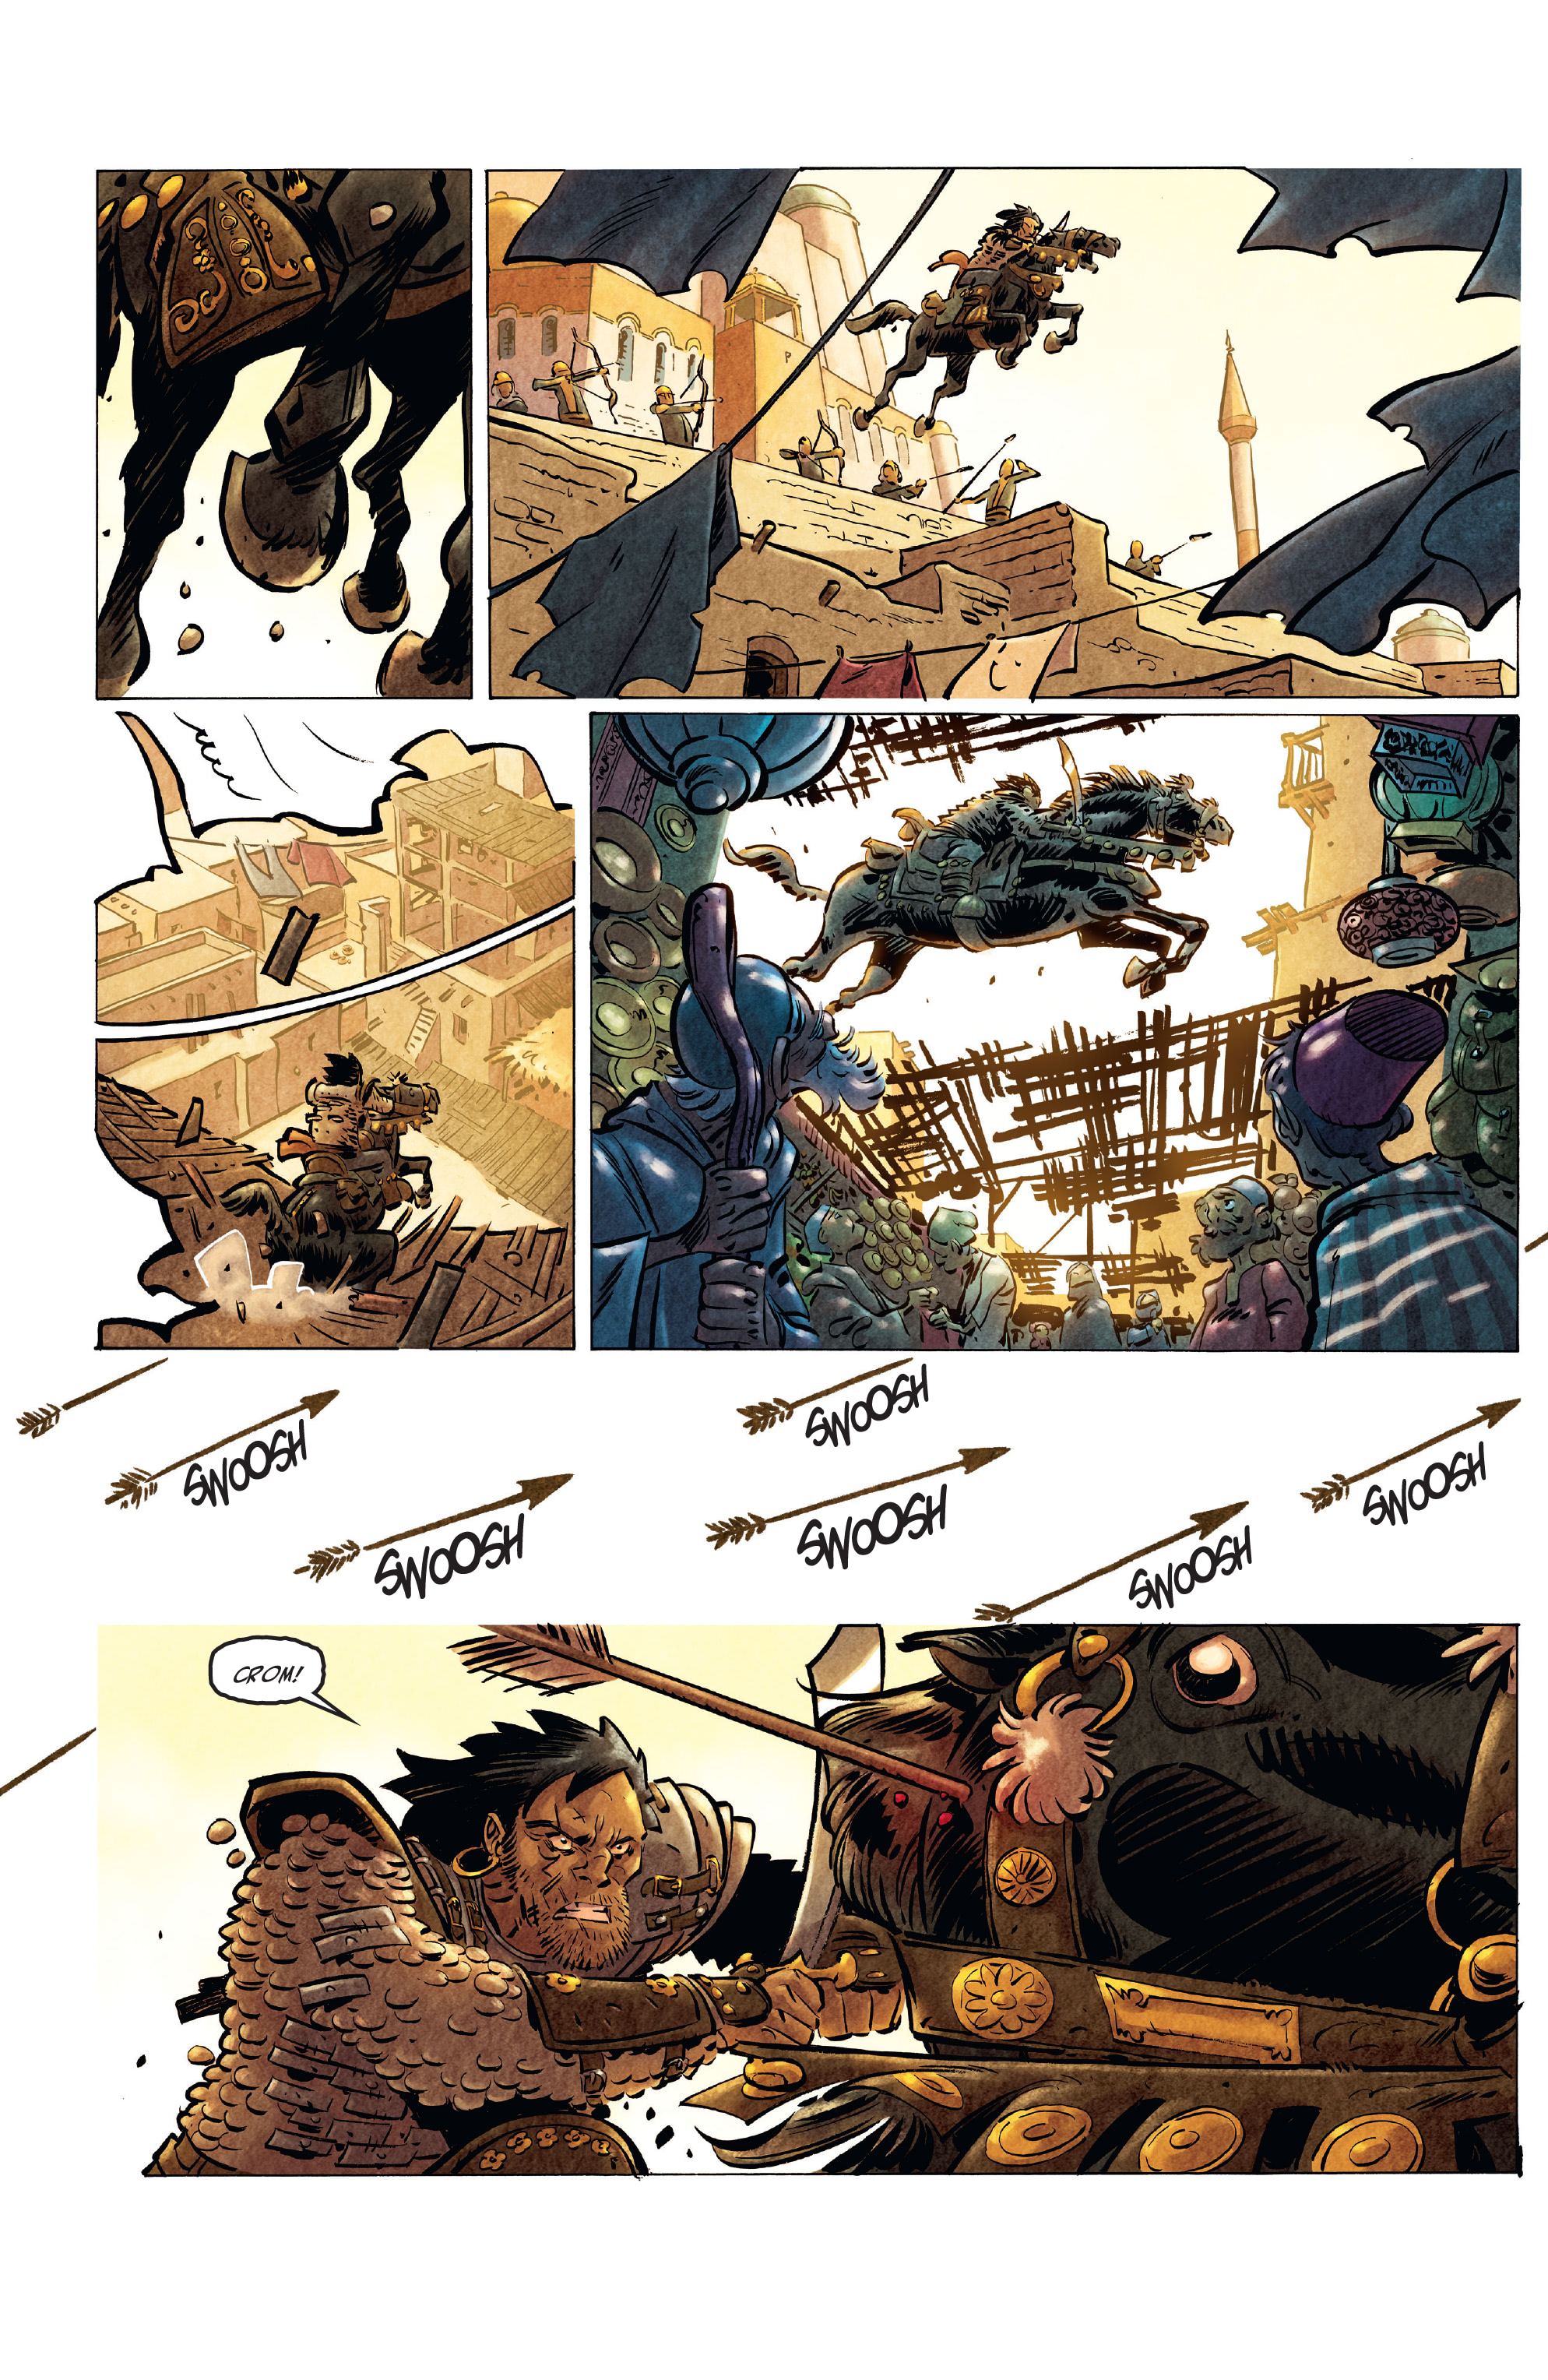 The Cimmerian: Queen of the Black Coast (2020-): Chapter 1 - Page 5